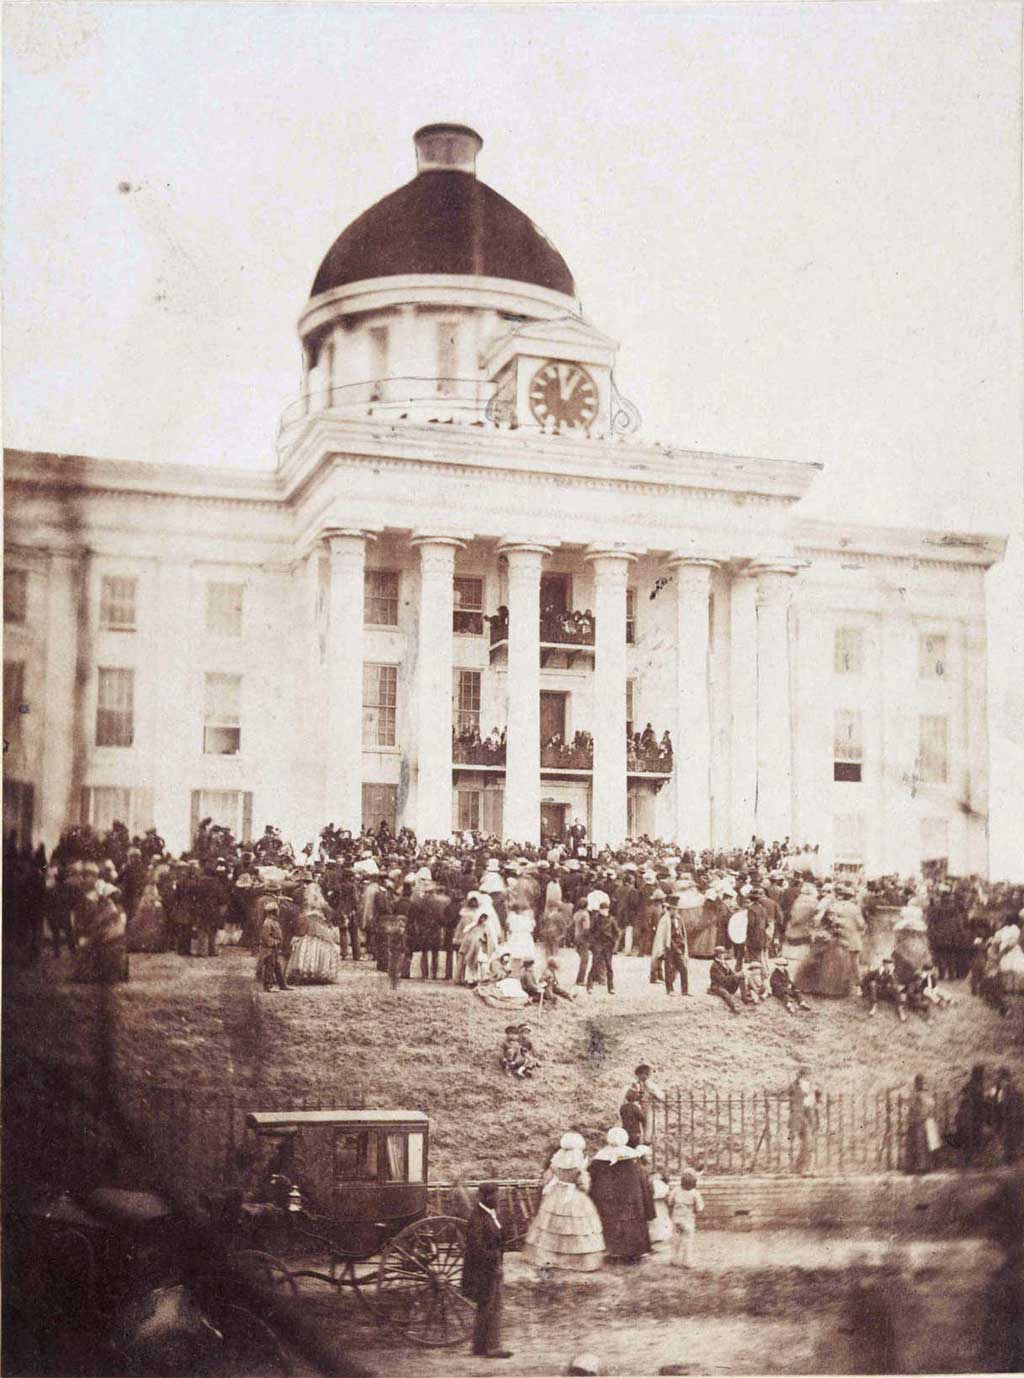 Crowd gathered in front of Alabama Capitol building for first inauguration of Jefferson Davis as President of the Confederate States of America at Montgomery, Alabama, February 18, 1861